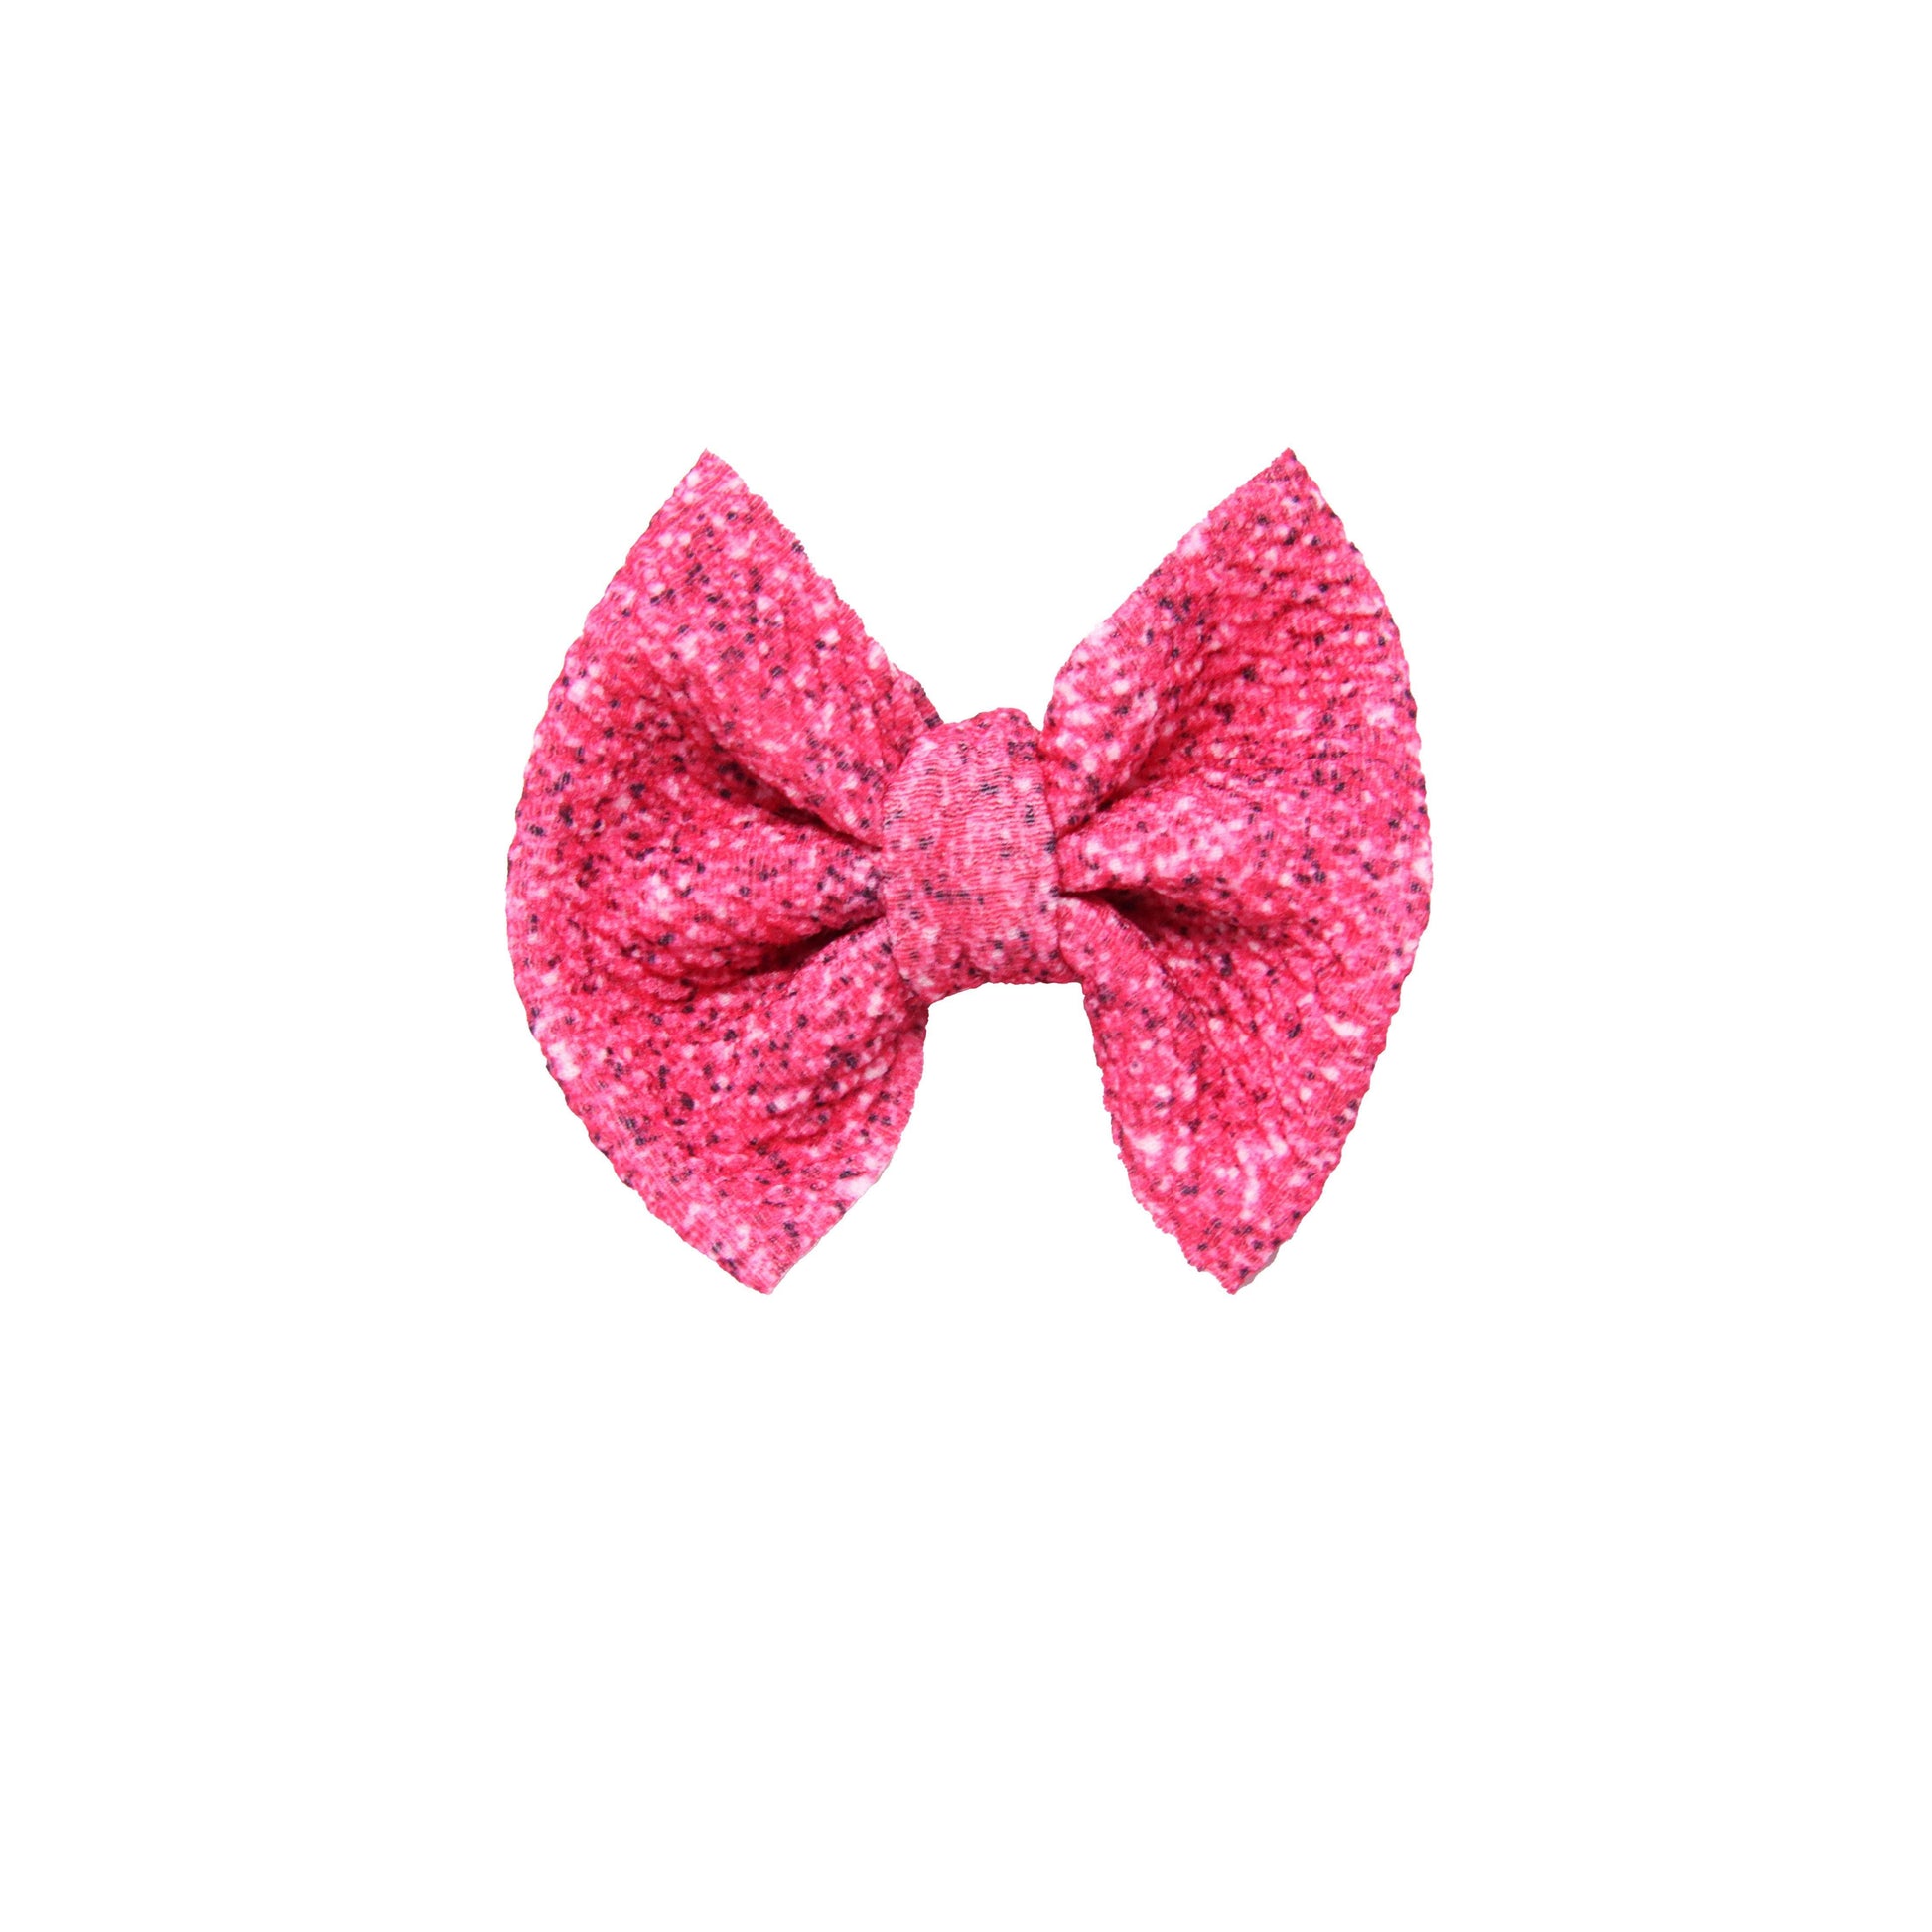 3 inch Pink Sparkle Fabric Bow